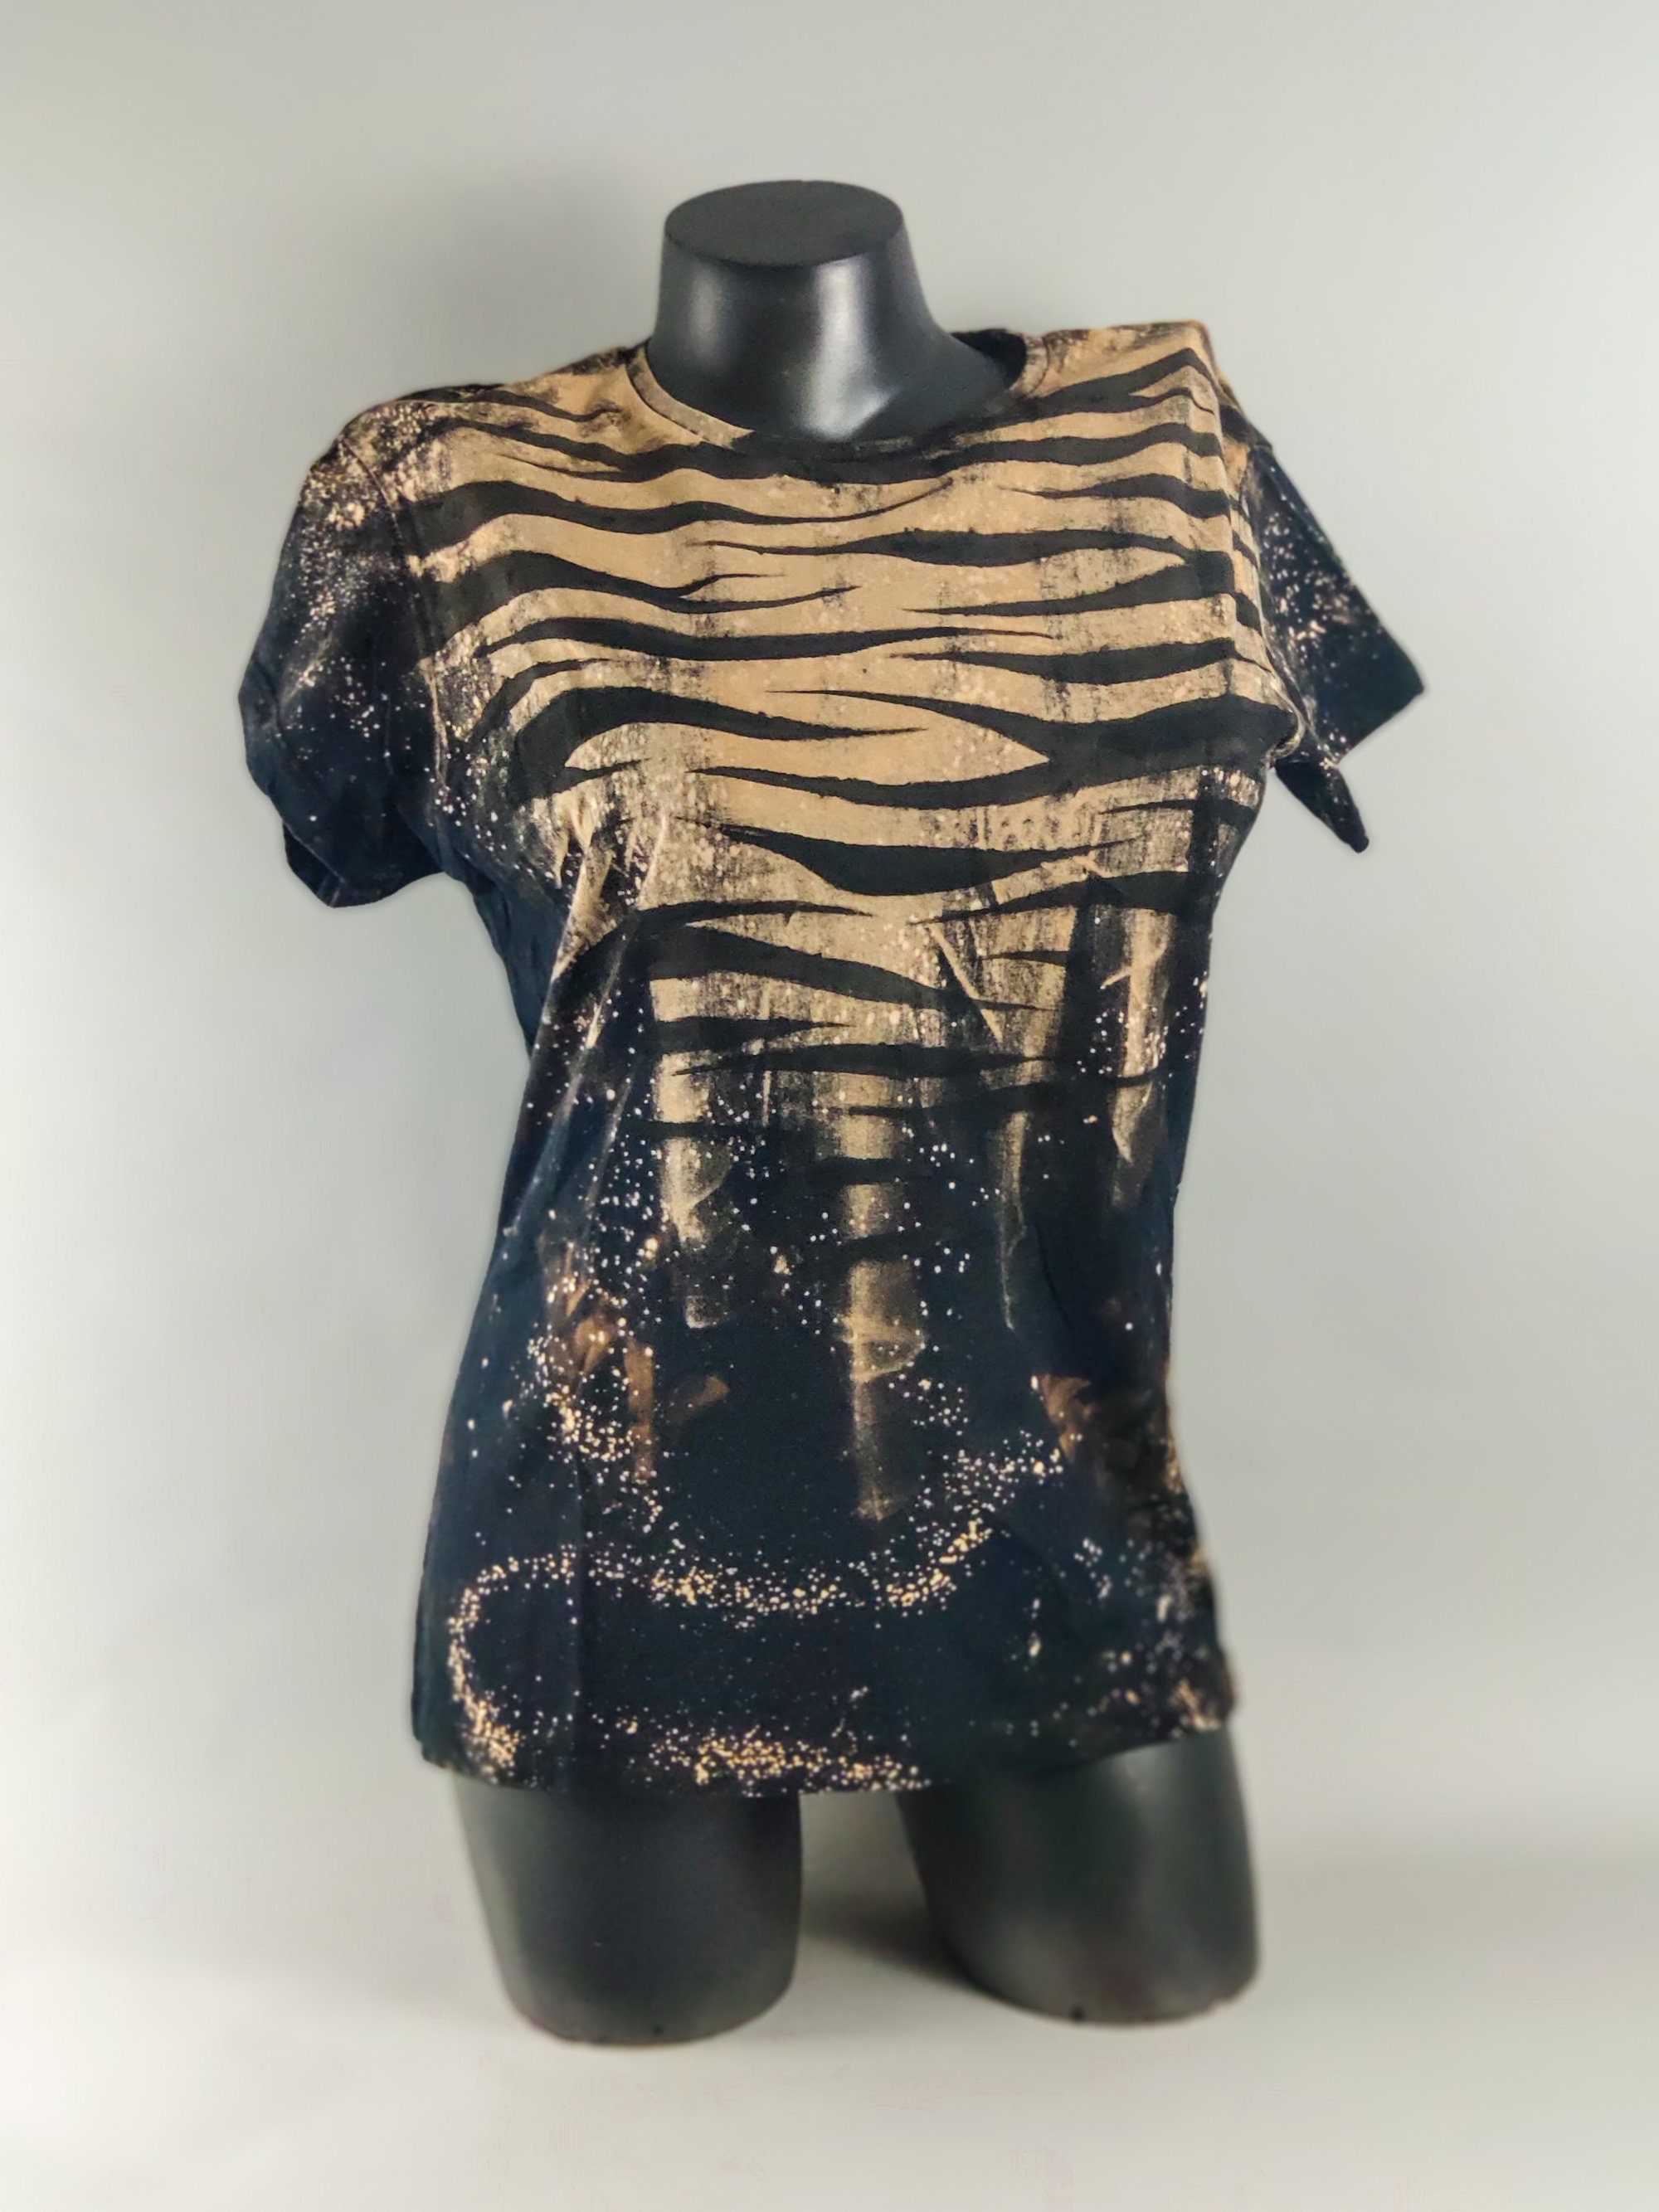 Post-apocalyptic Top Tiger Striped Tee Wildcat T-shirt - Etsy